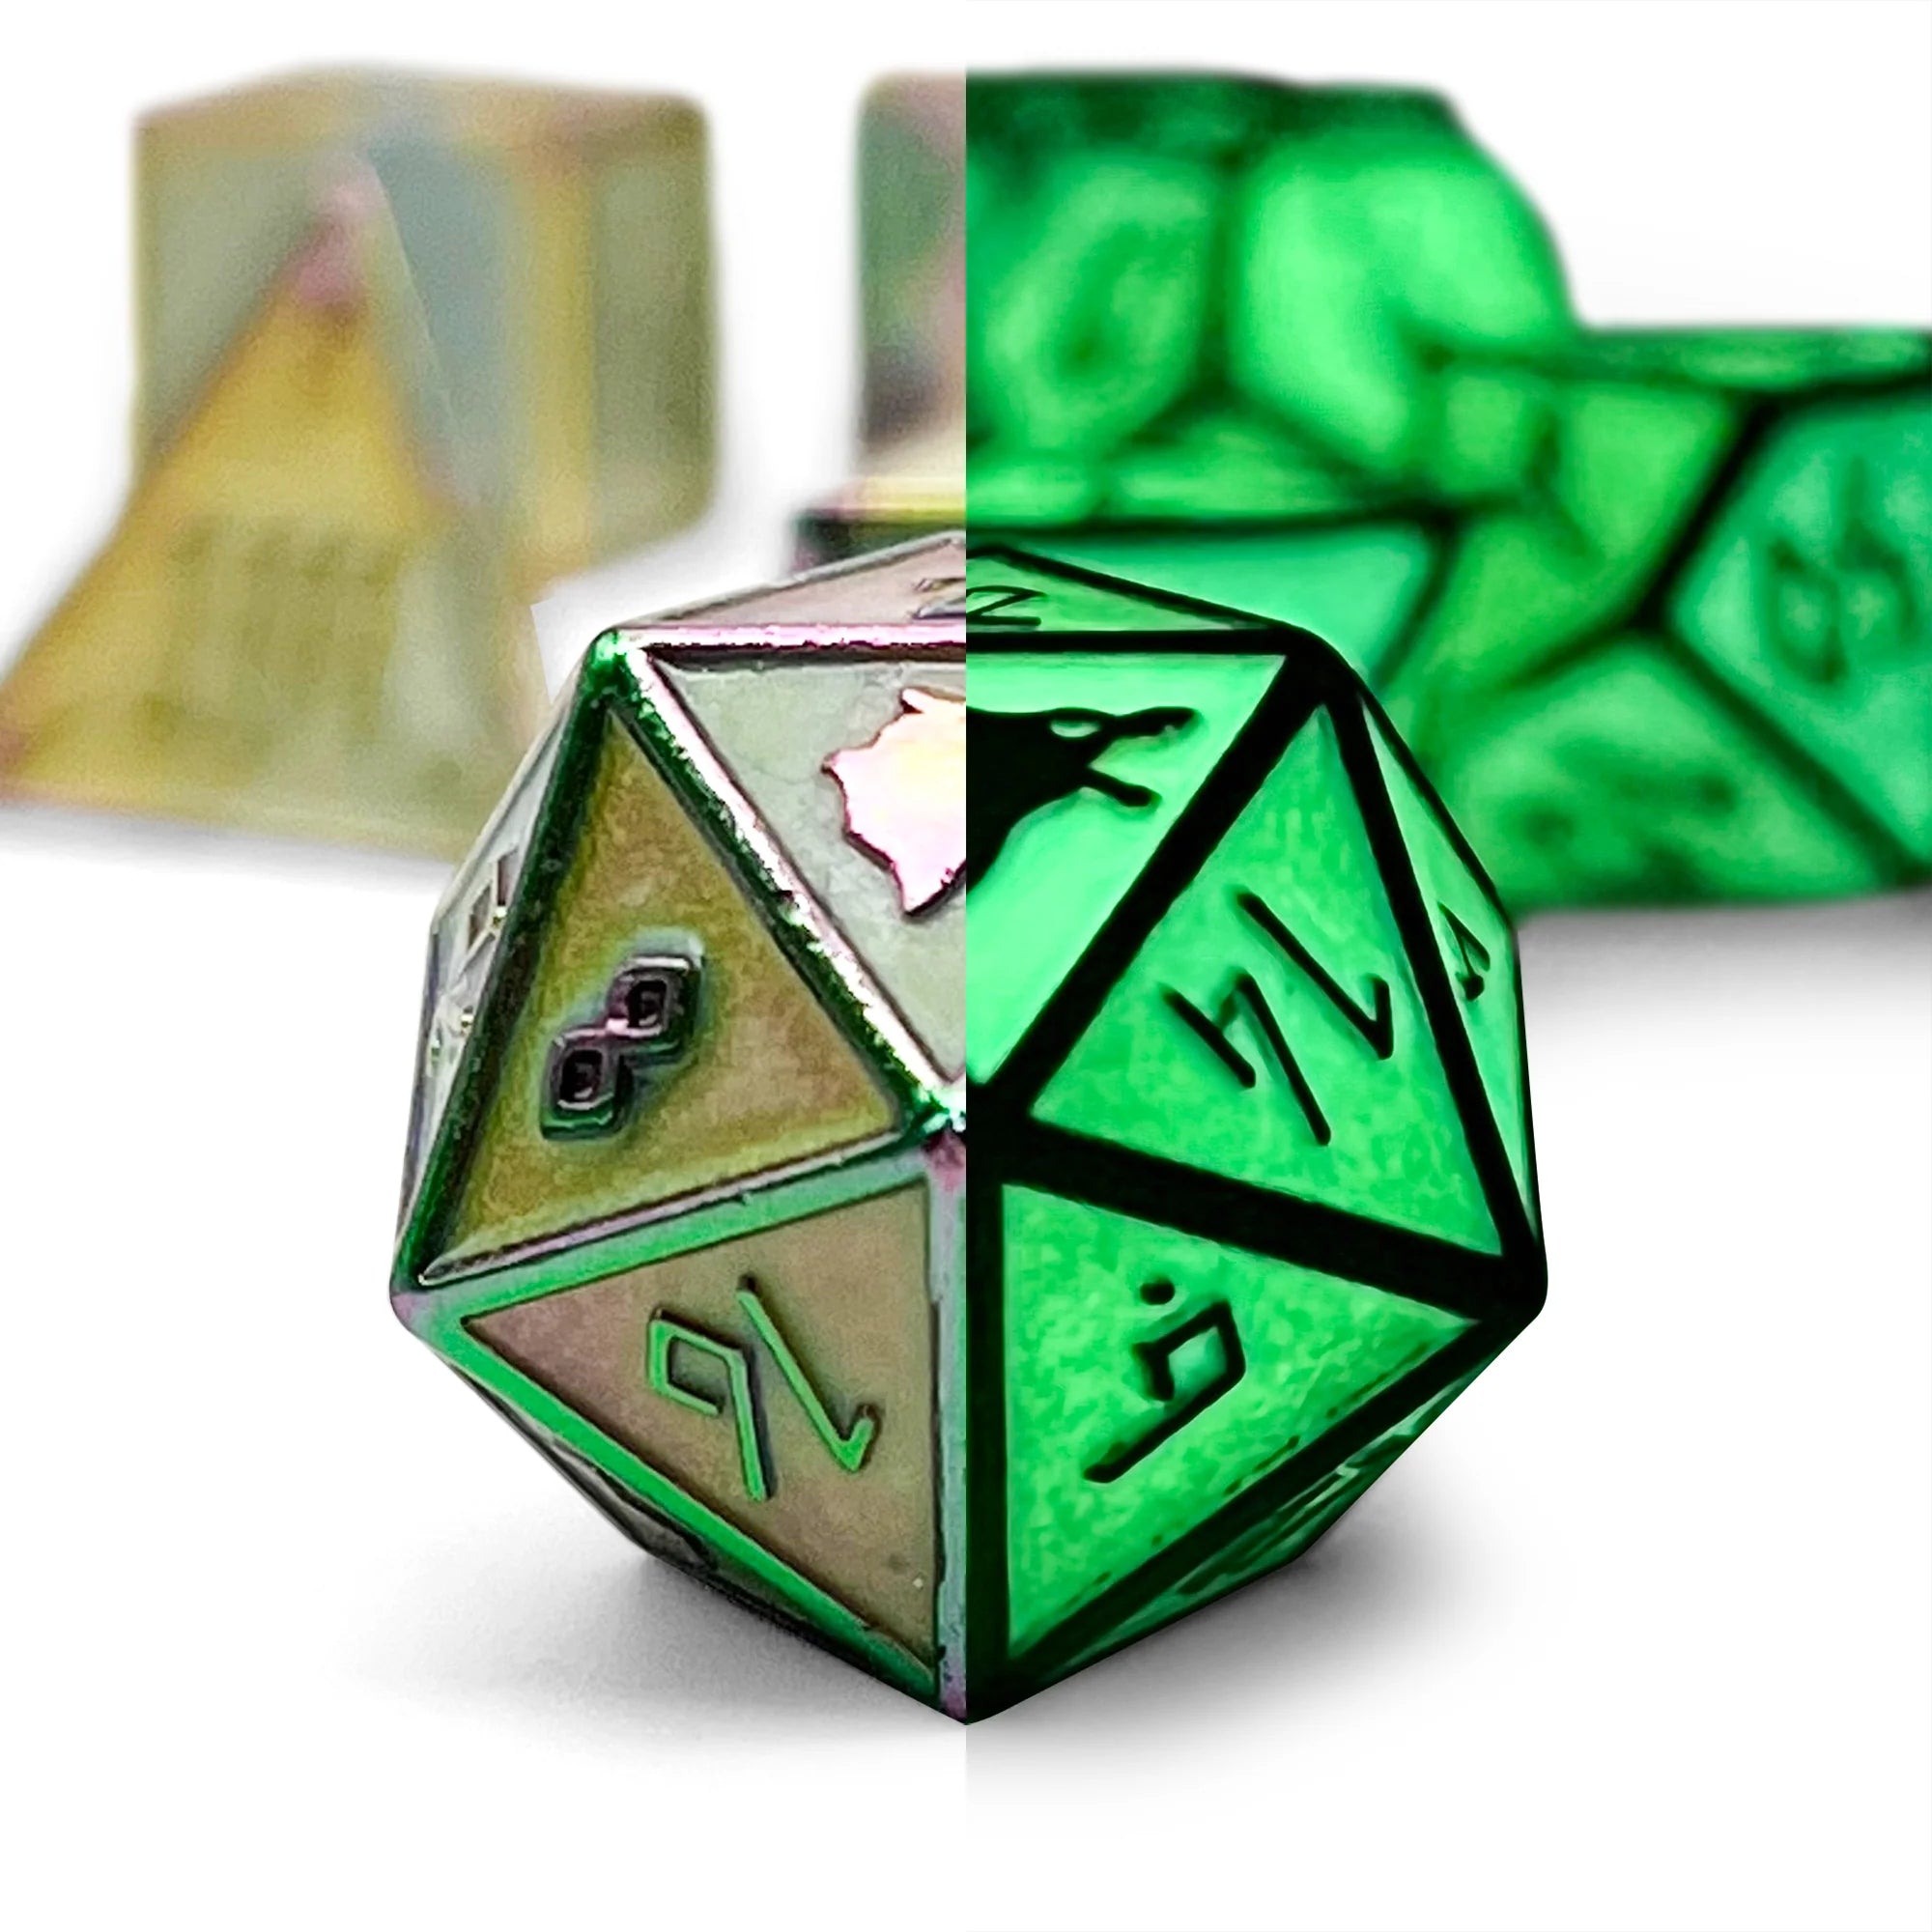 YGGDRASIL NORSE THEMED METAL DICE SET | Gopher Games